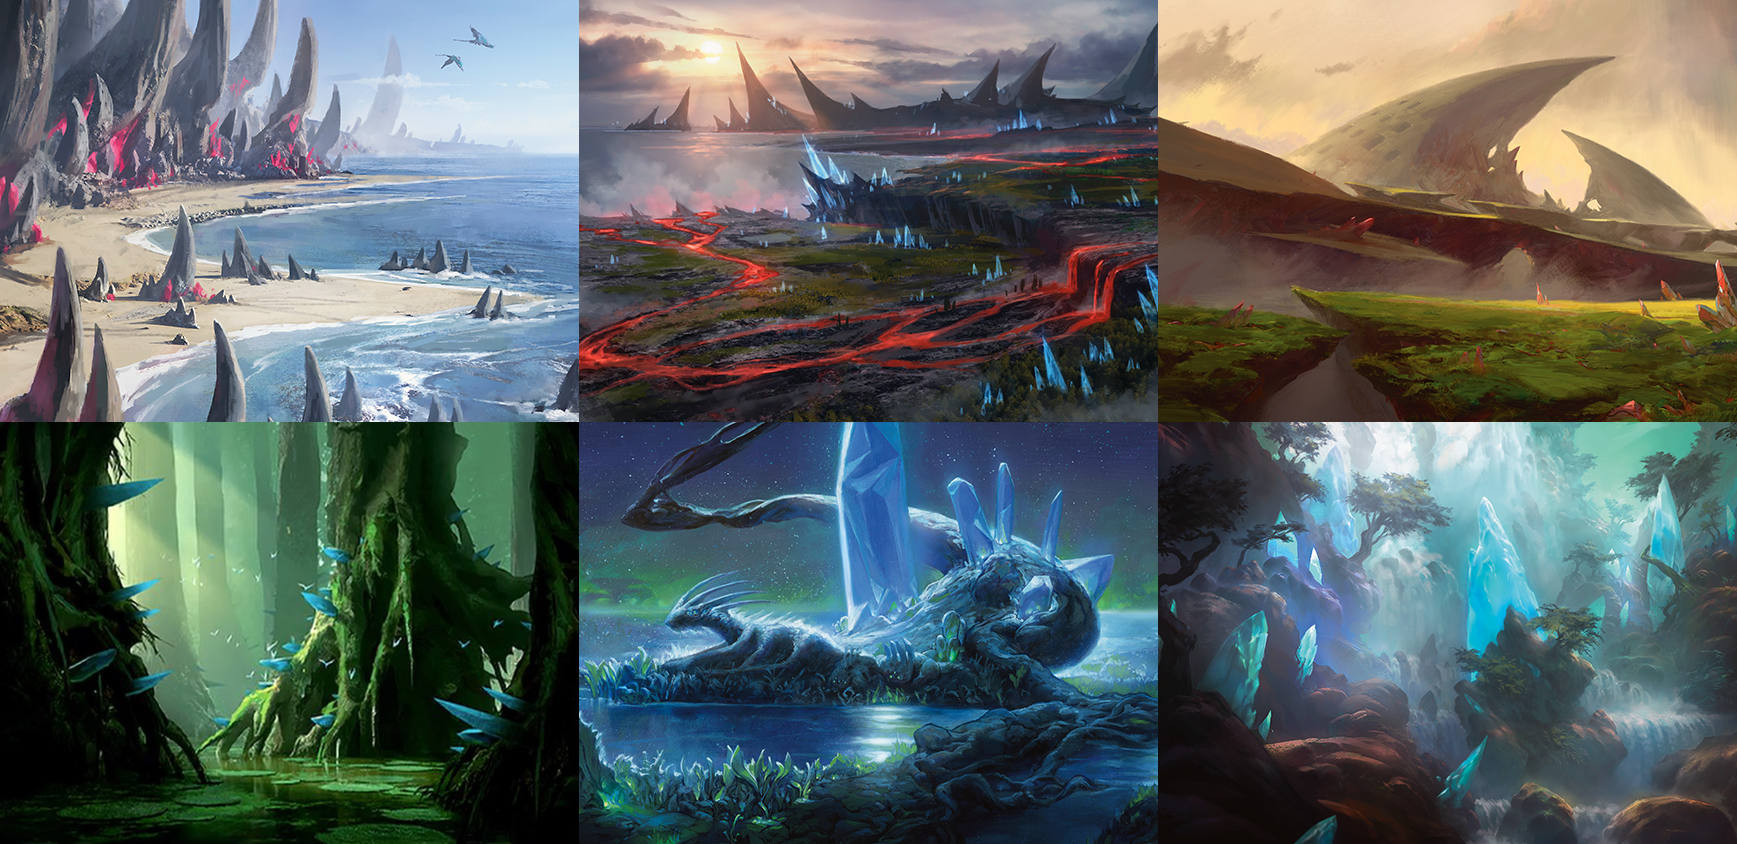 The diverse Triomes of Ikoria reflect the draft's diverse themes